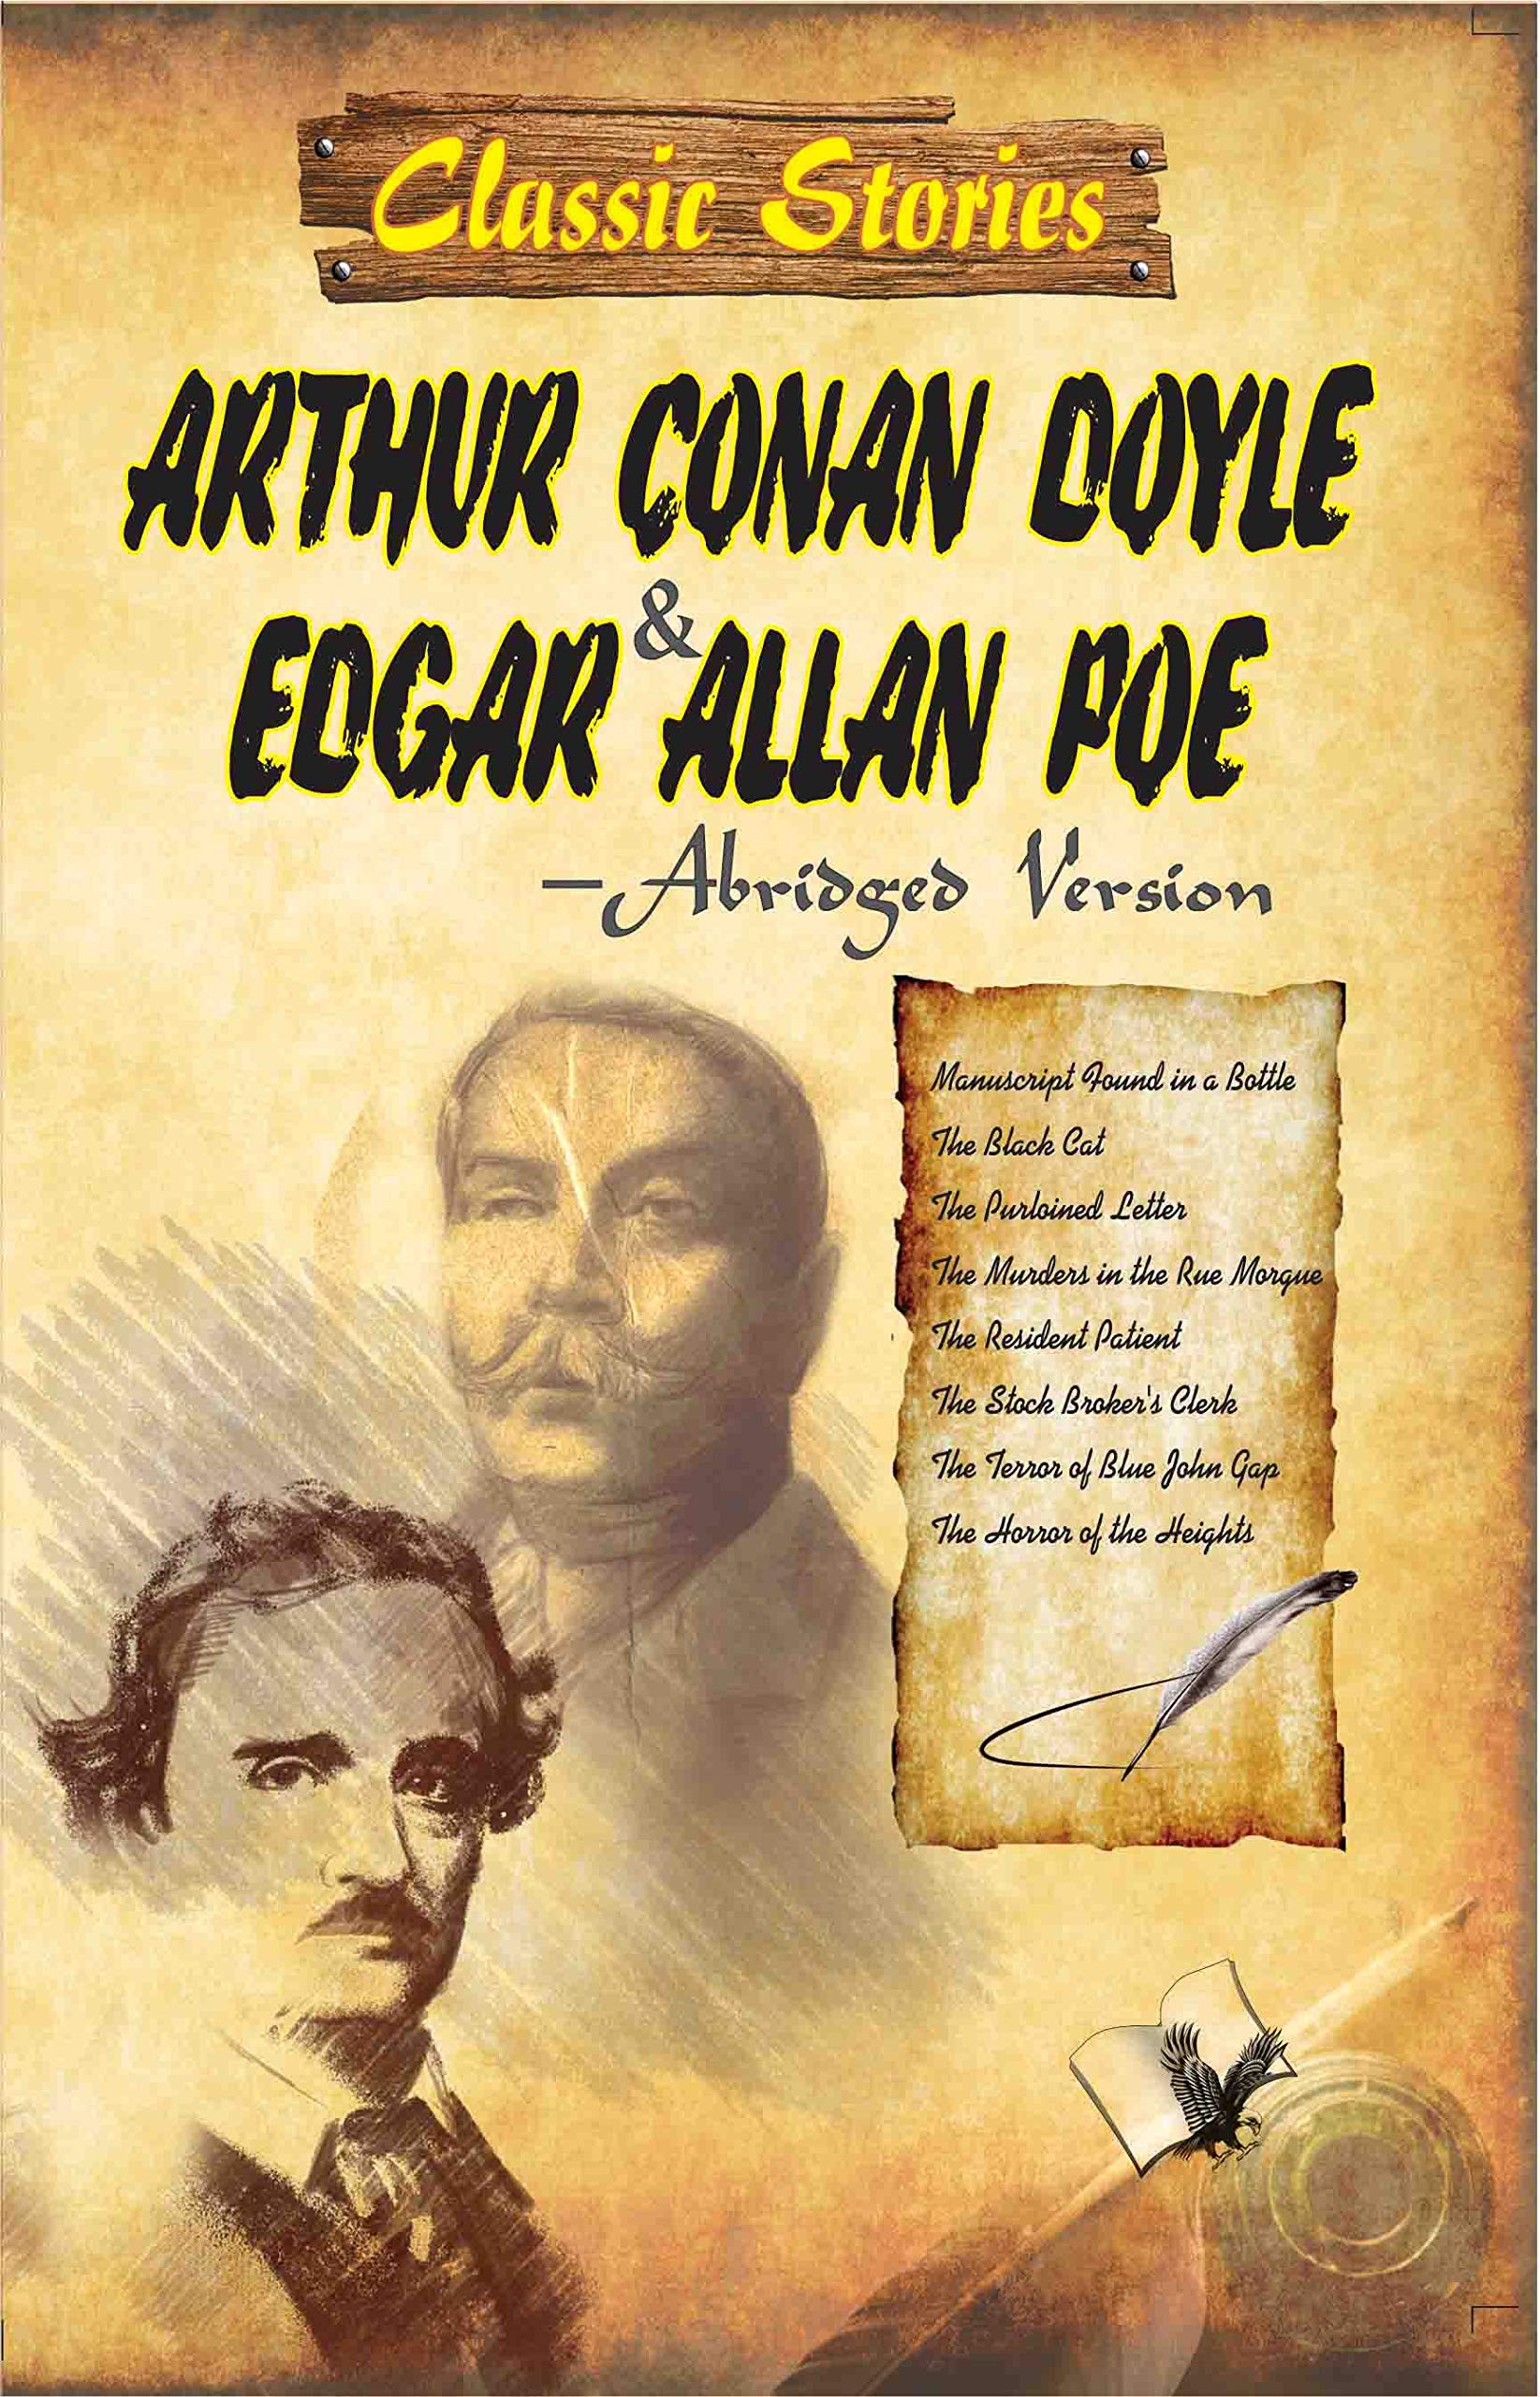 Classic Stories of Arthur Conan Coyle Edgar & Allan poe: 8 Fast-Paced Stories of Thrill and Excitement